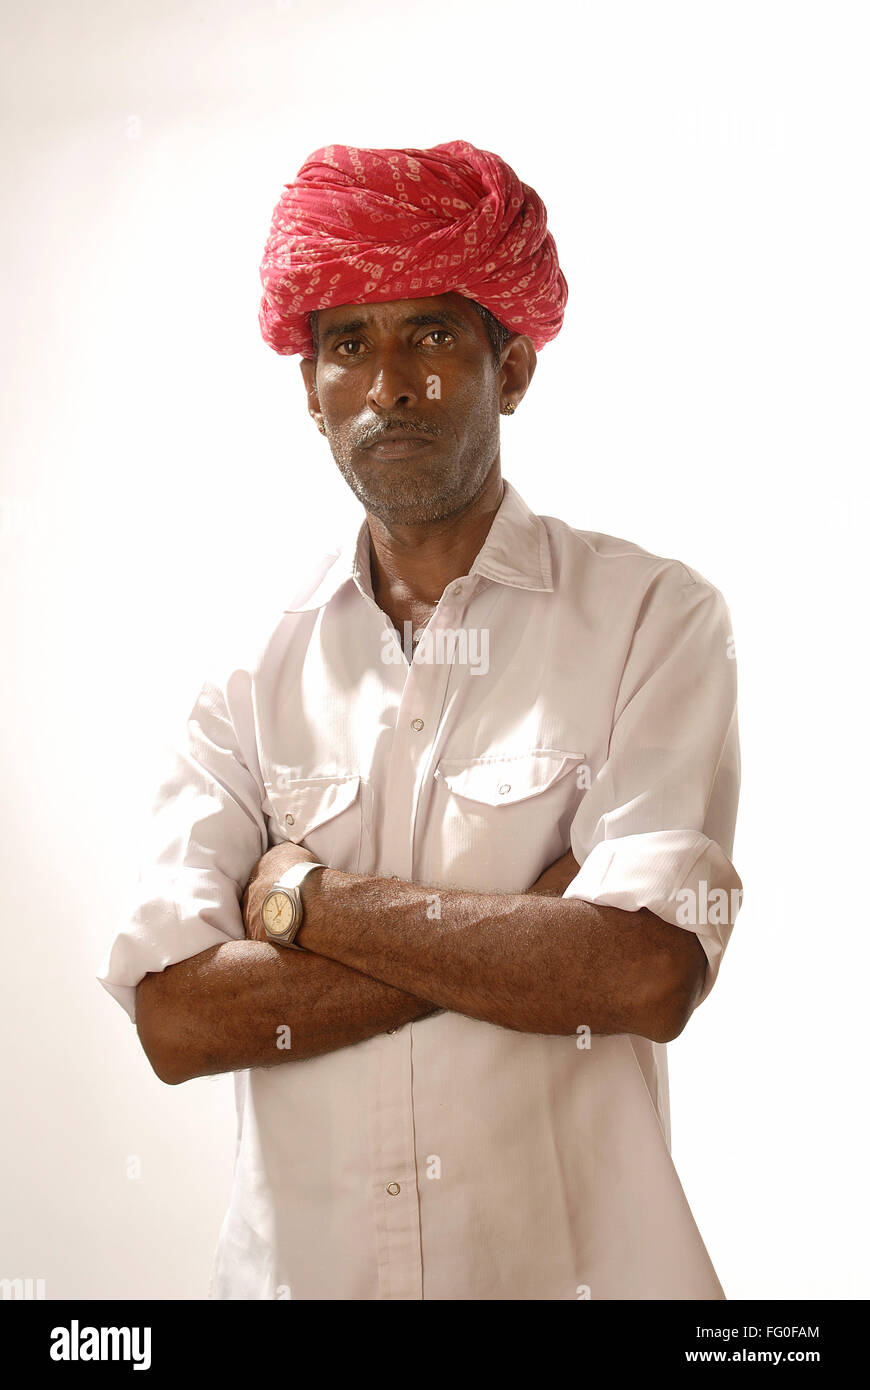 Indian man from Rajasthan wearing red pagdi MR #  693 D Stock Photo